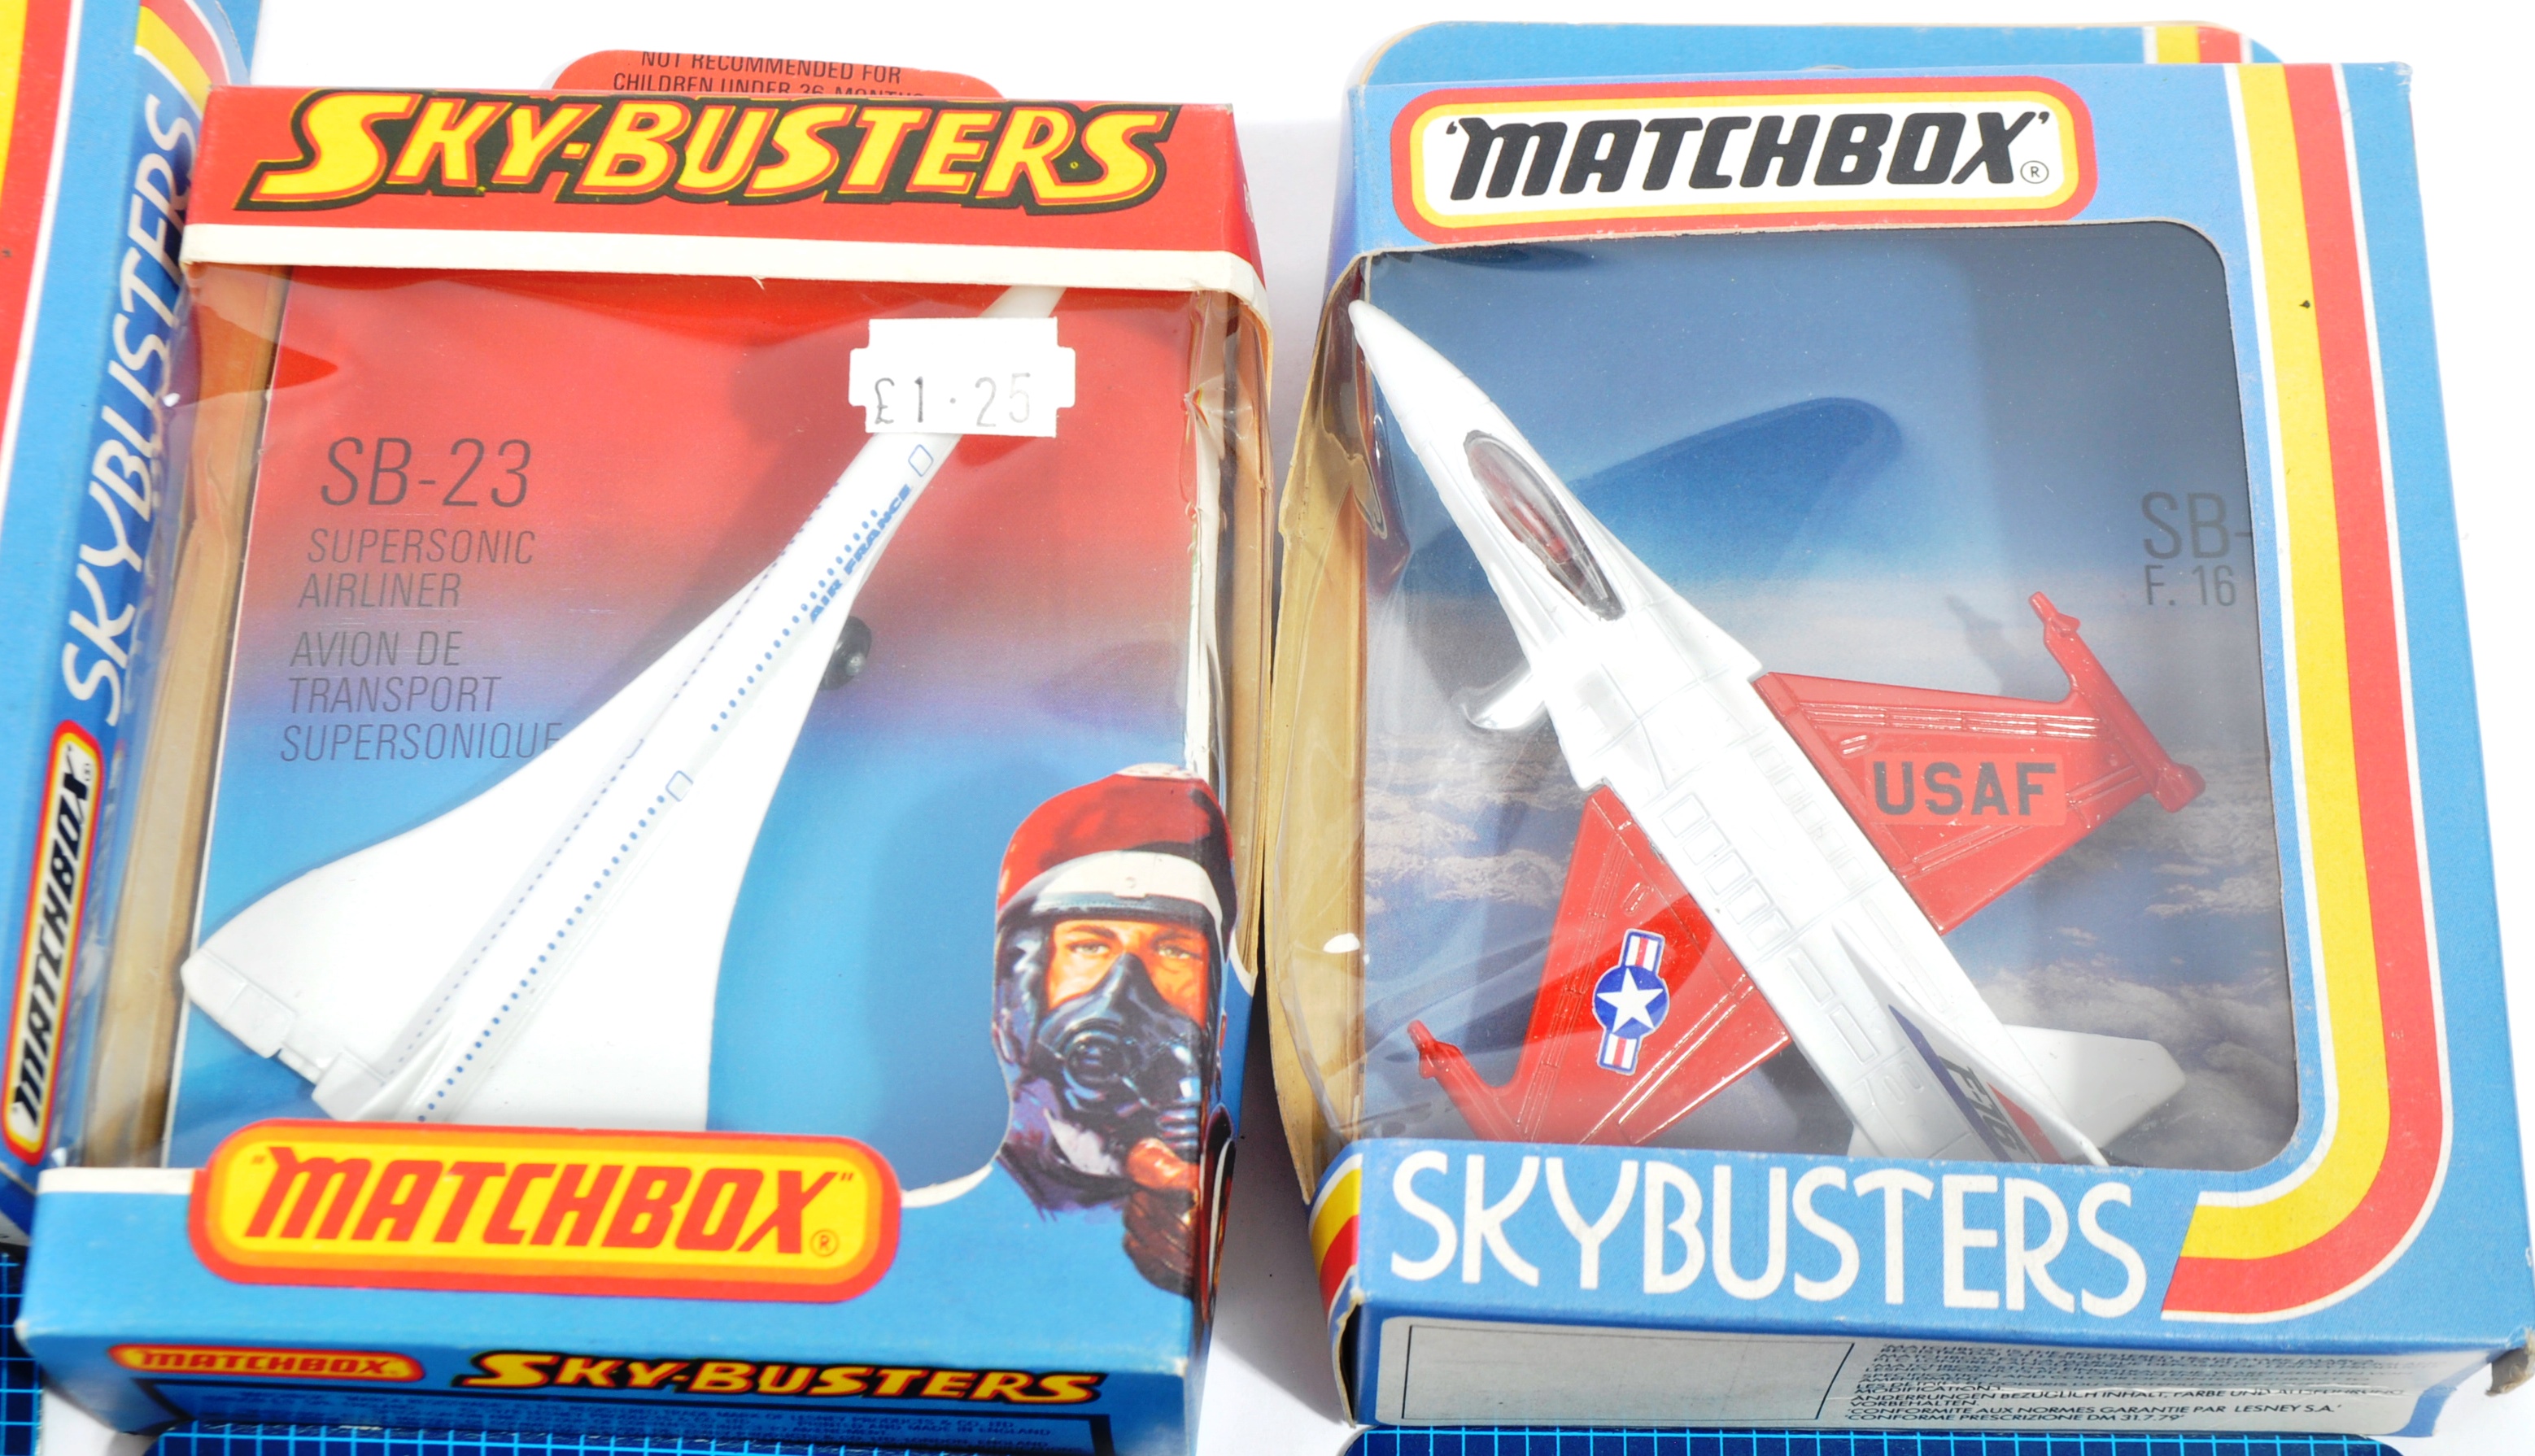 COLLECTION OF X15 MATCHBOX SKYBUSTERS DIECAST MODEL AEROPLANES - Image 3 of 7